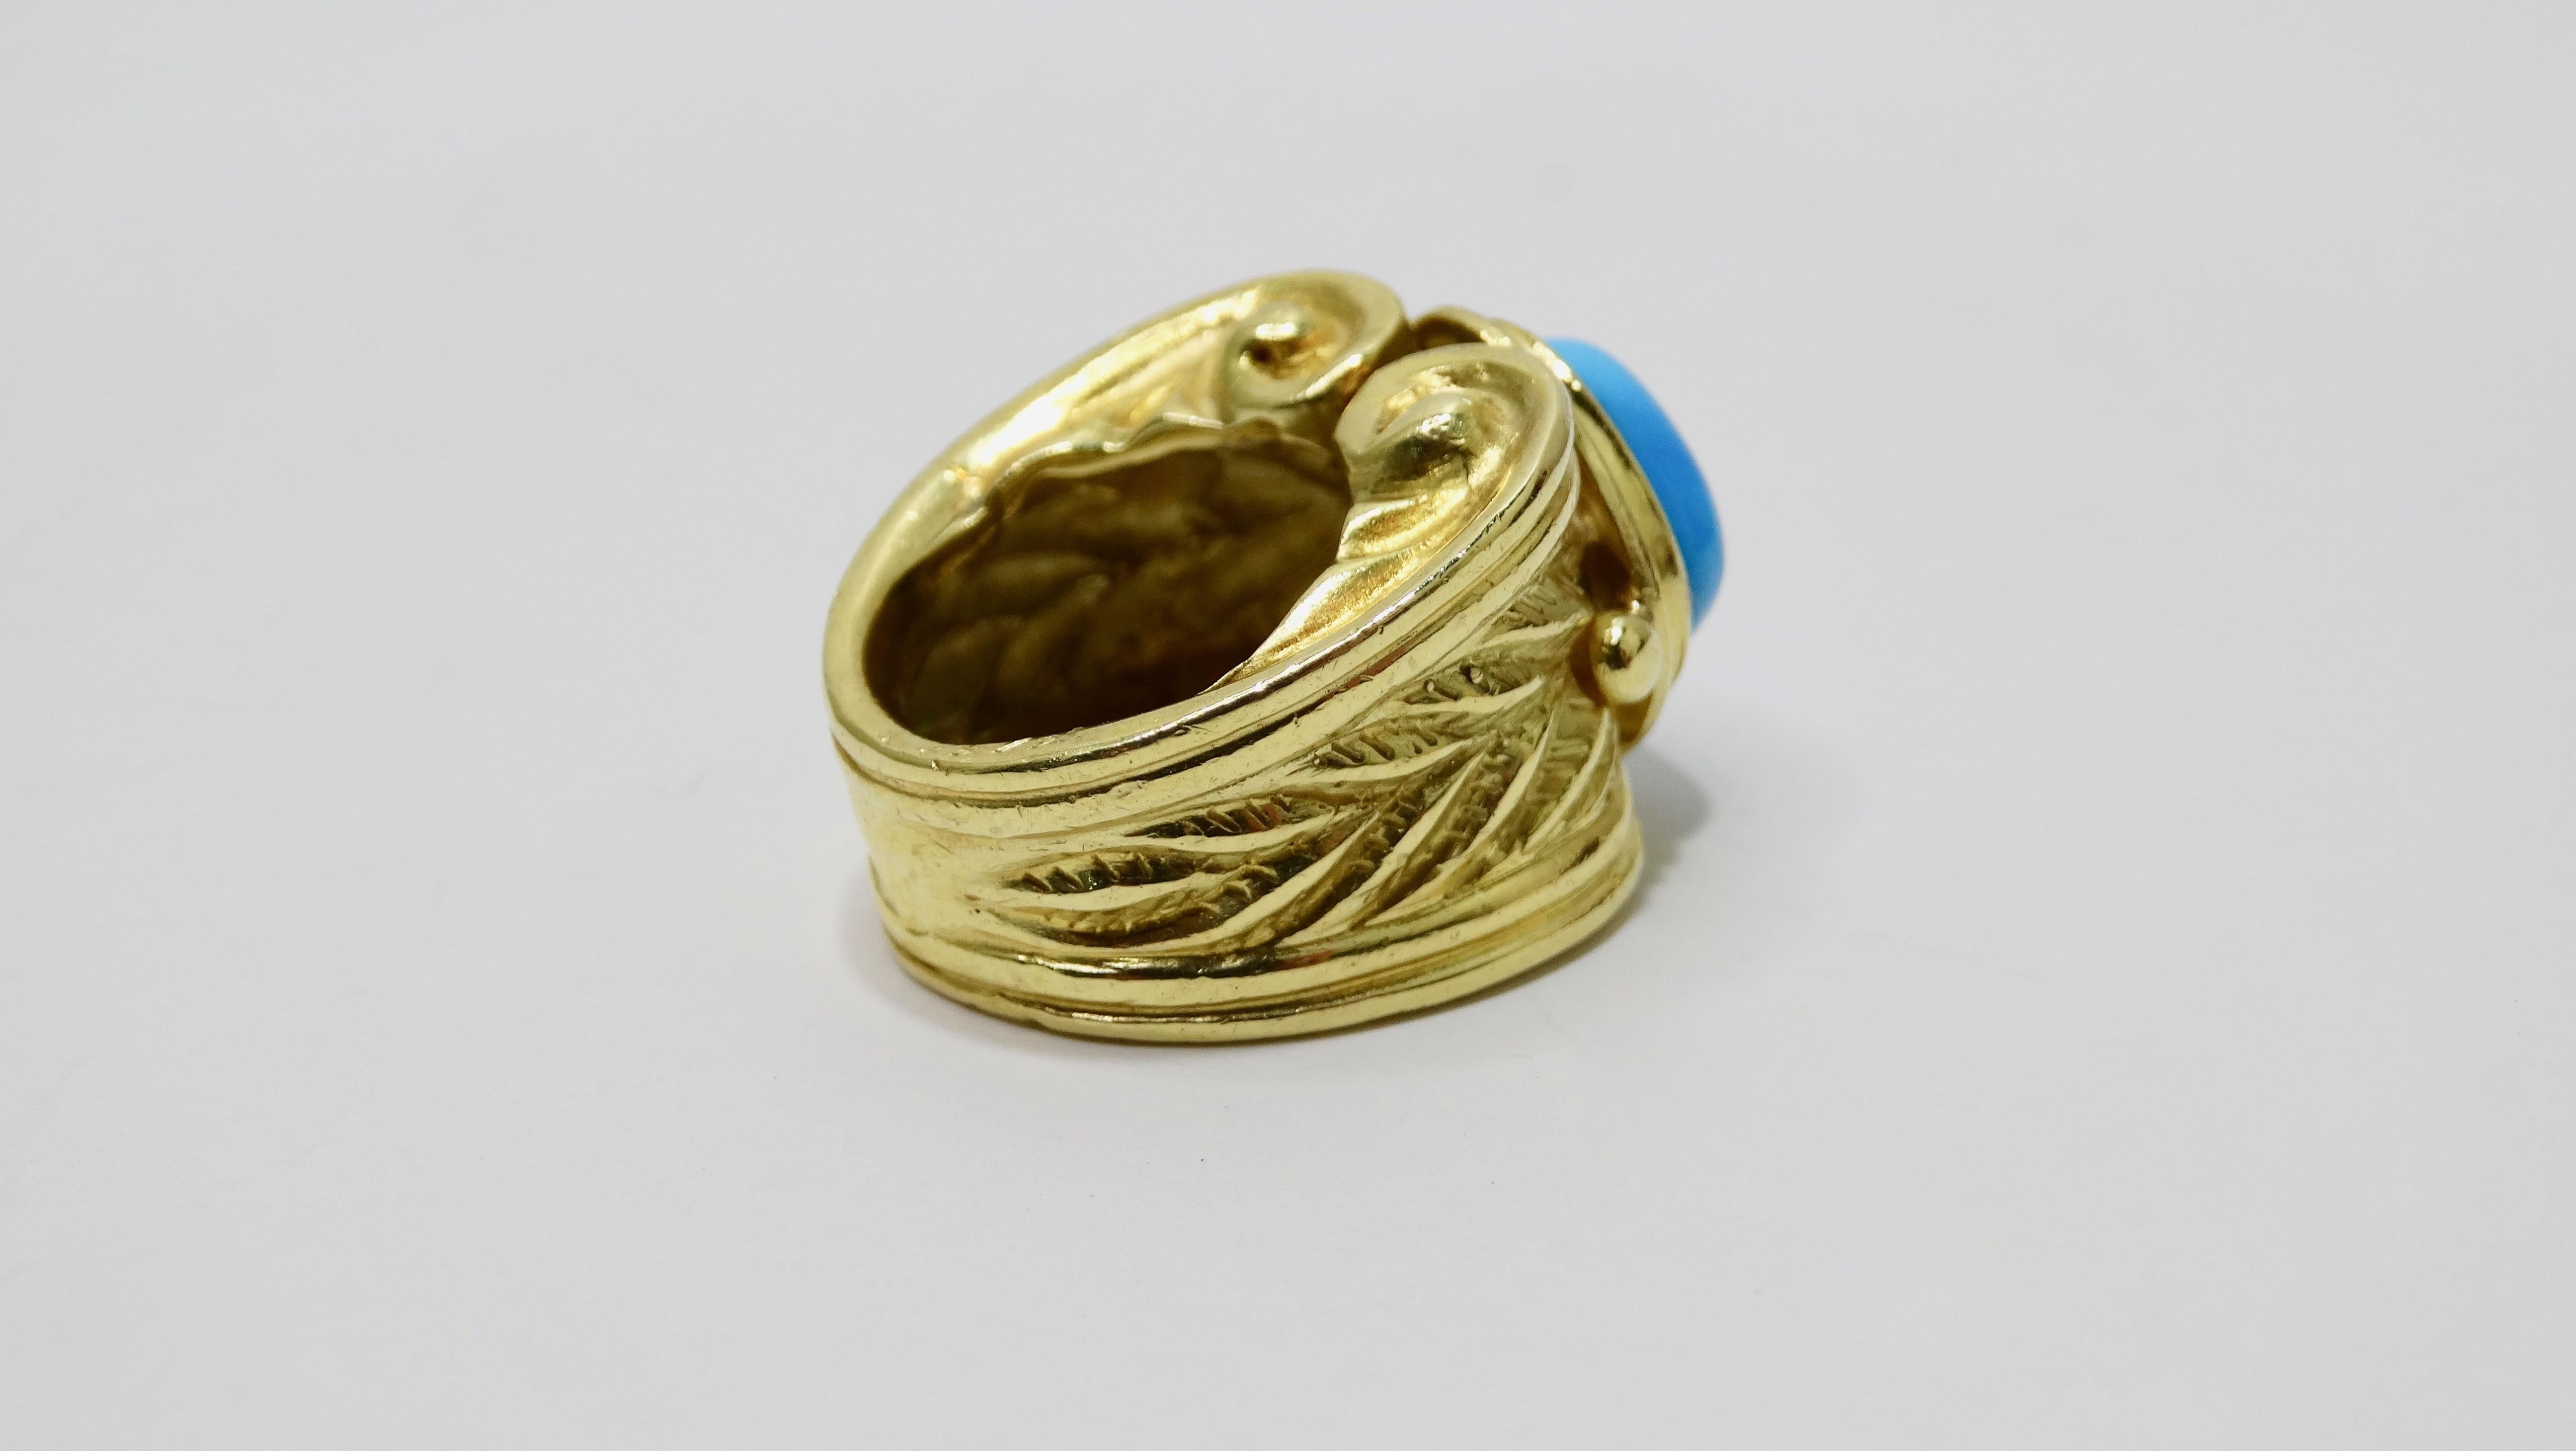 Cabochon Persian Turquoise 18k Gold Cocktail Ring 